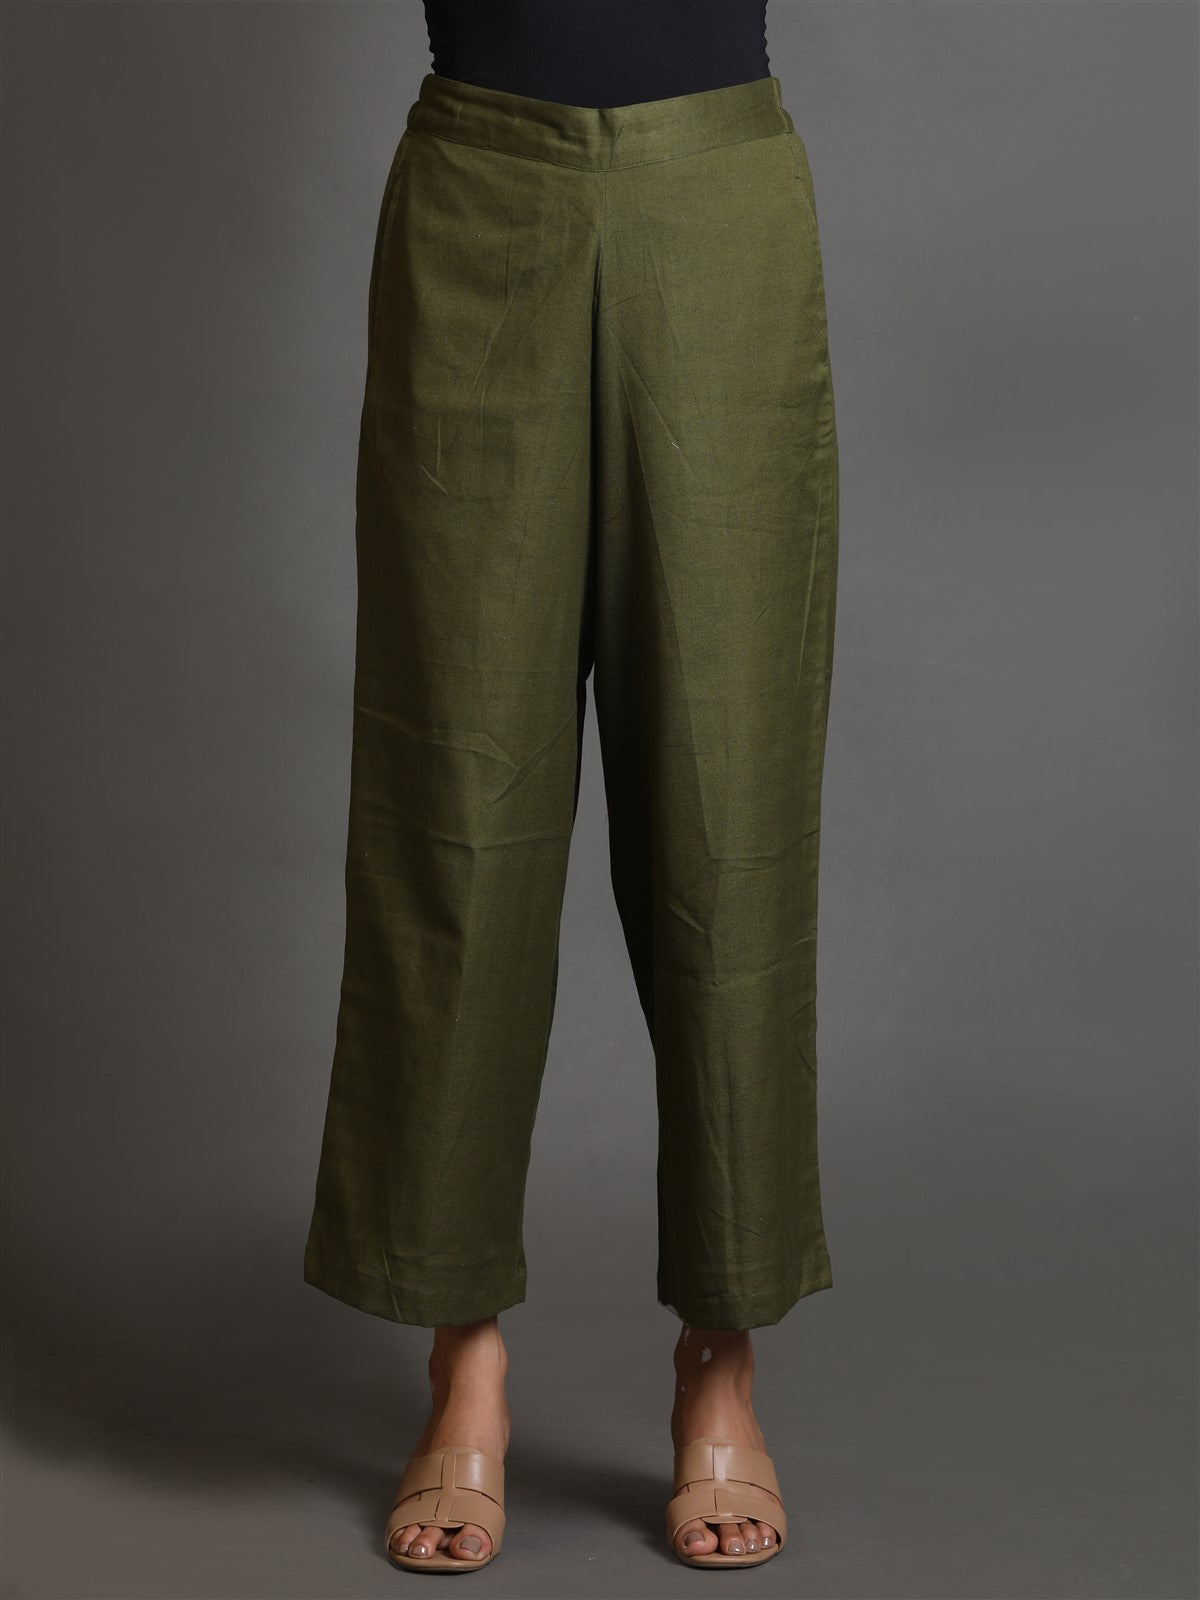 Olive-Green Cotton Flared Pant